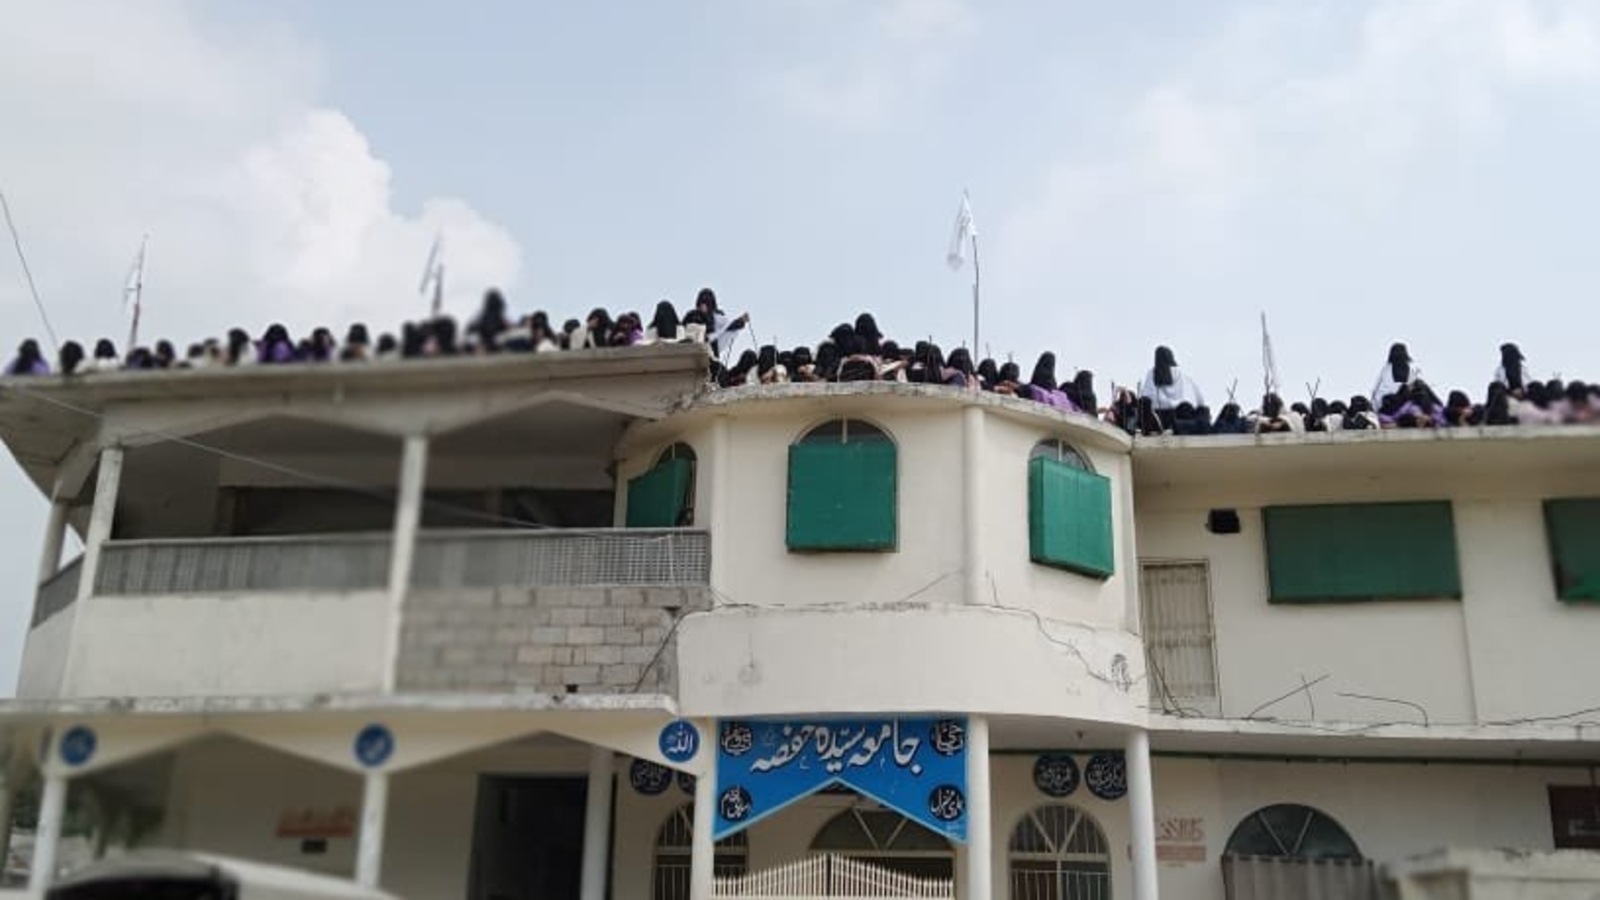 Afghan Taliban flags hoisted in Islamabad seminary, police registers case | World News